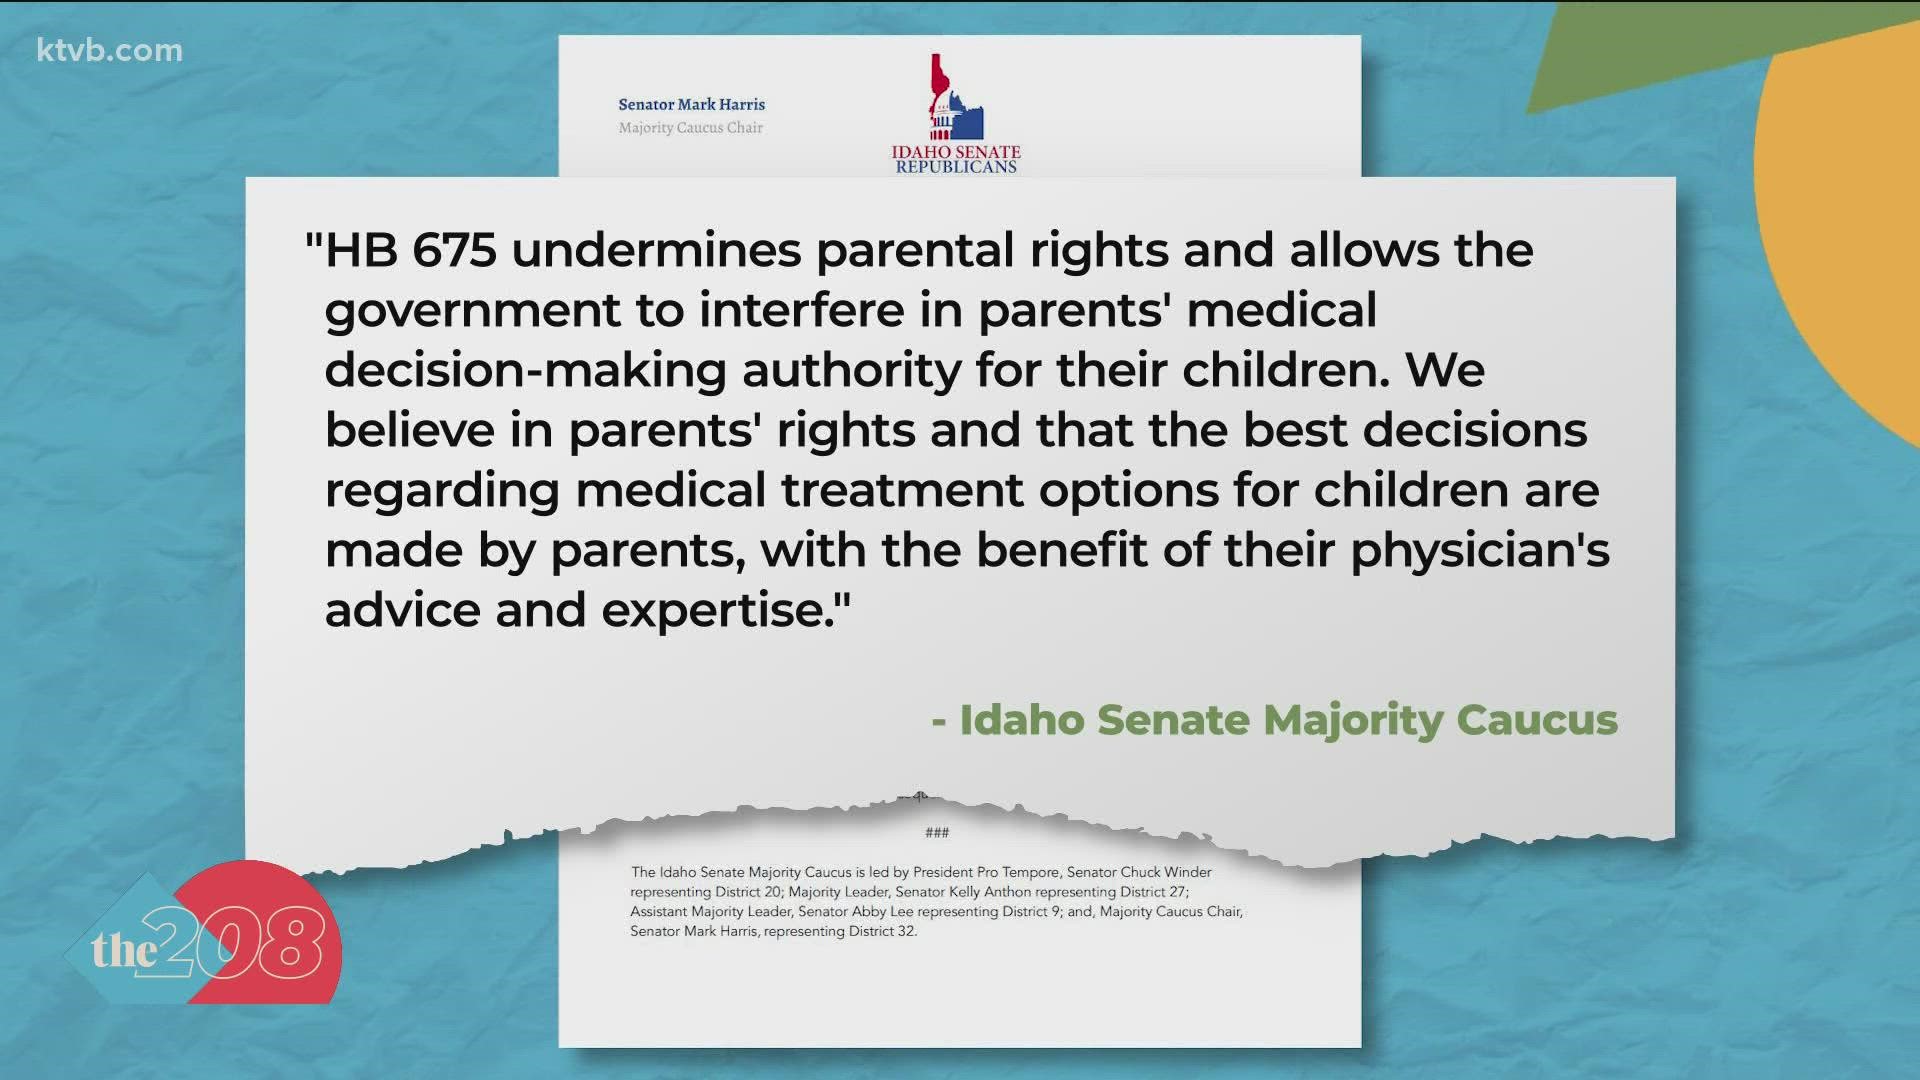 The bill prohibits gender confirmation medical treatment for anyone under the age of 18, and would place a ban on surgery, puberty blockers and hormone treatments